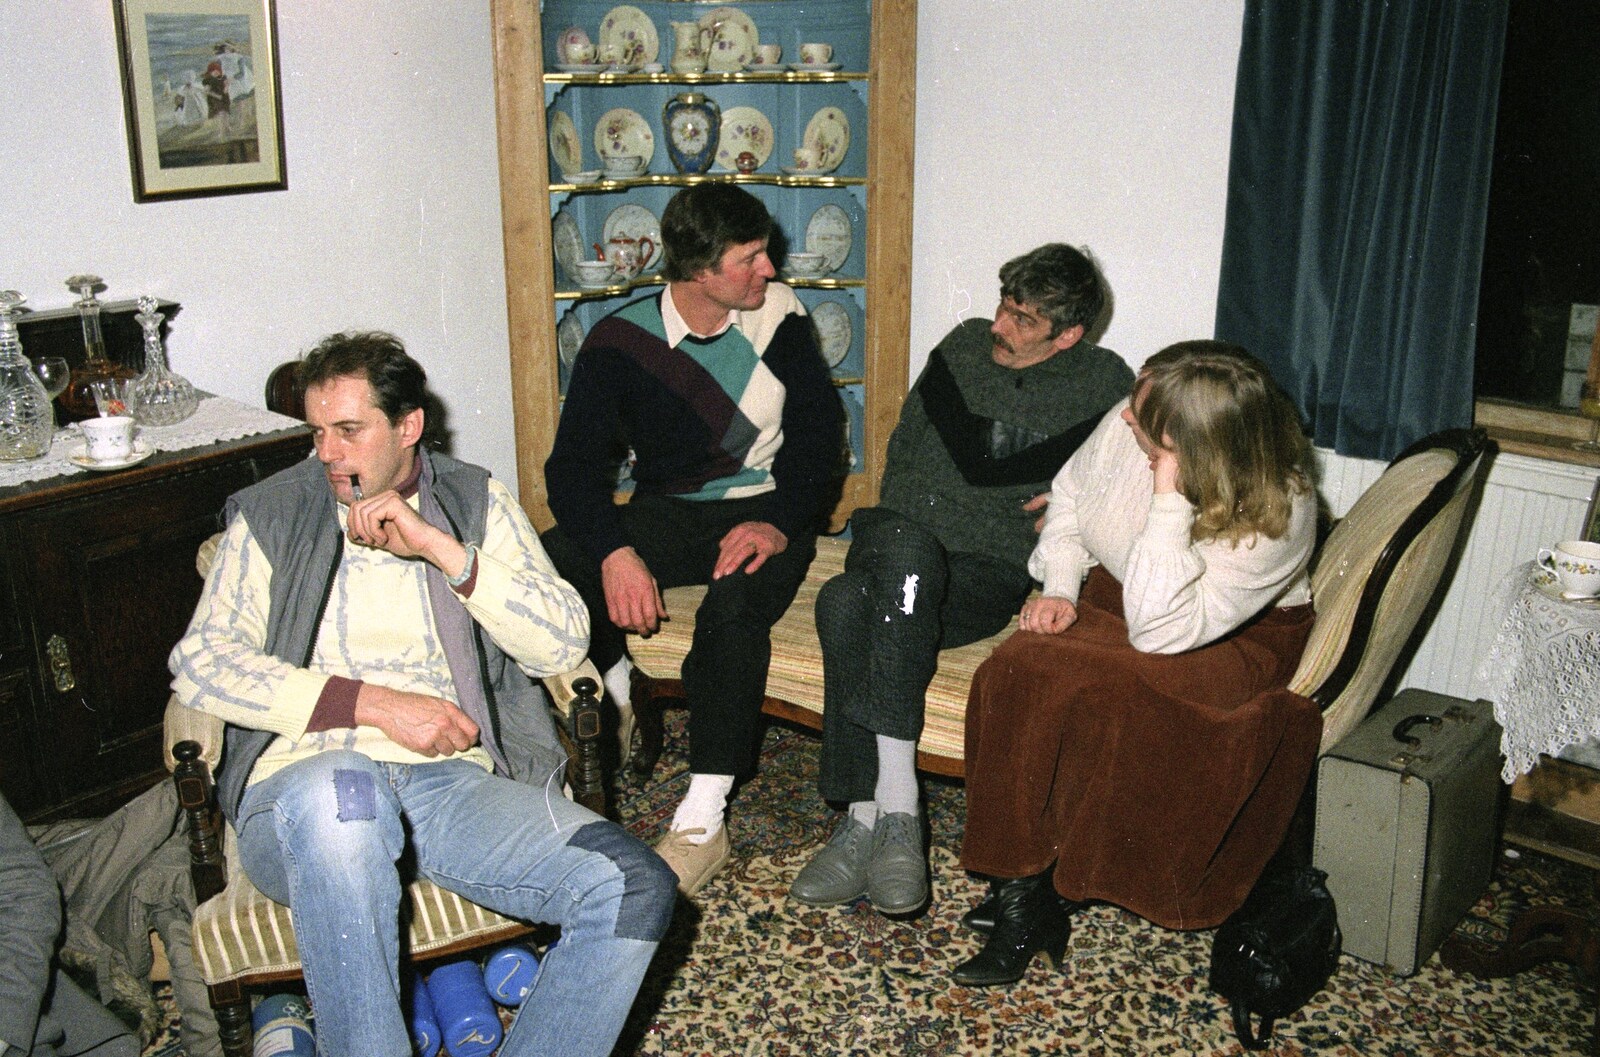 Geoff chats to people from Late Night, and Christmas with the Coxes, Needham, Norfolk - 25th December 1989